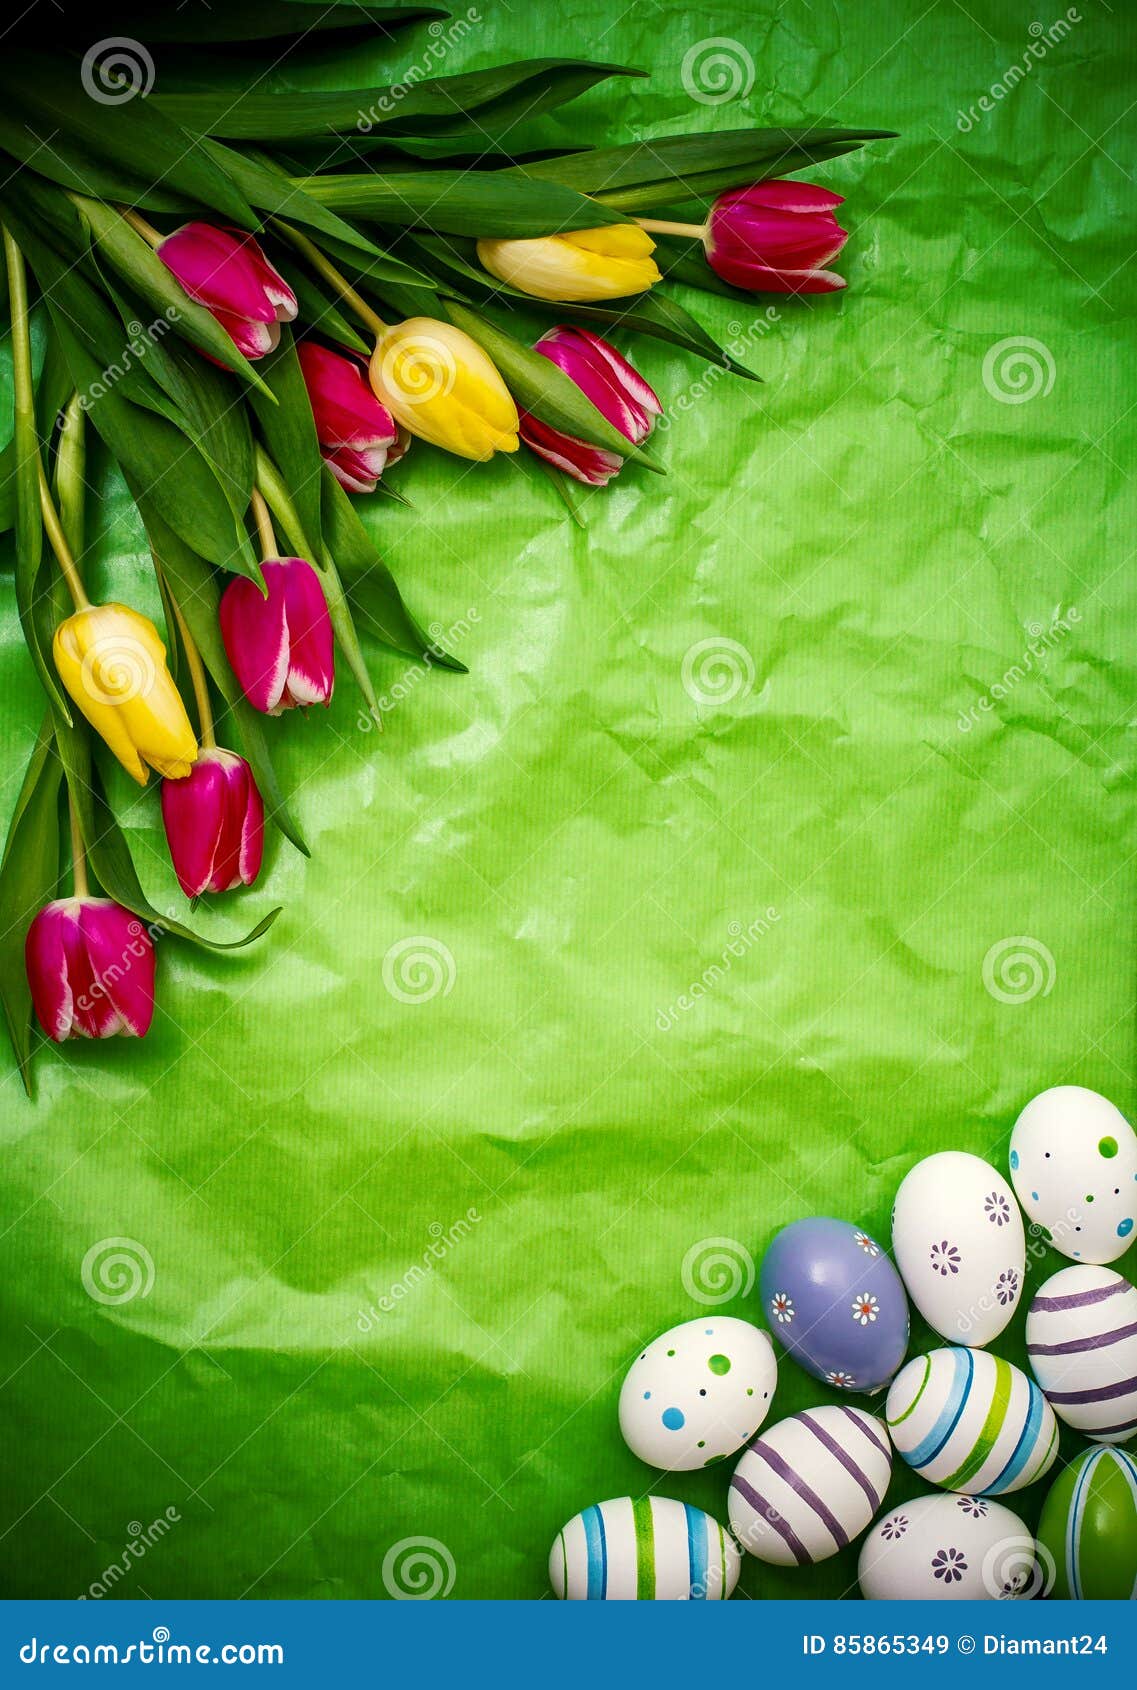 Eastern egg, tulips on green crumpled wrapping paper, top view